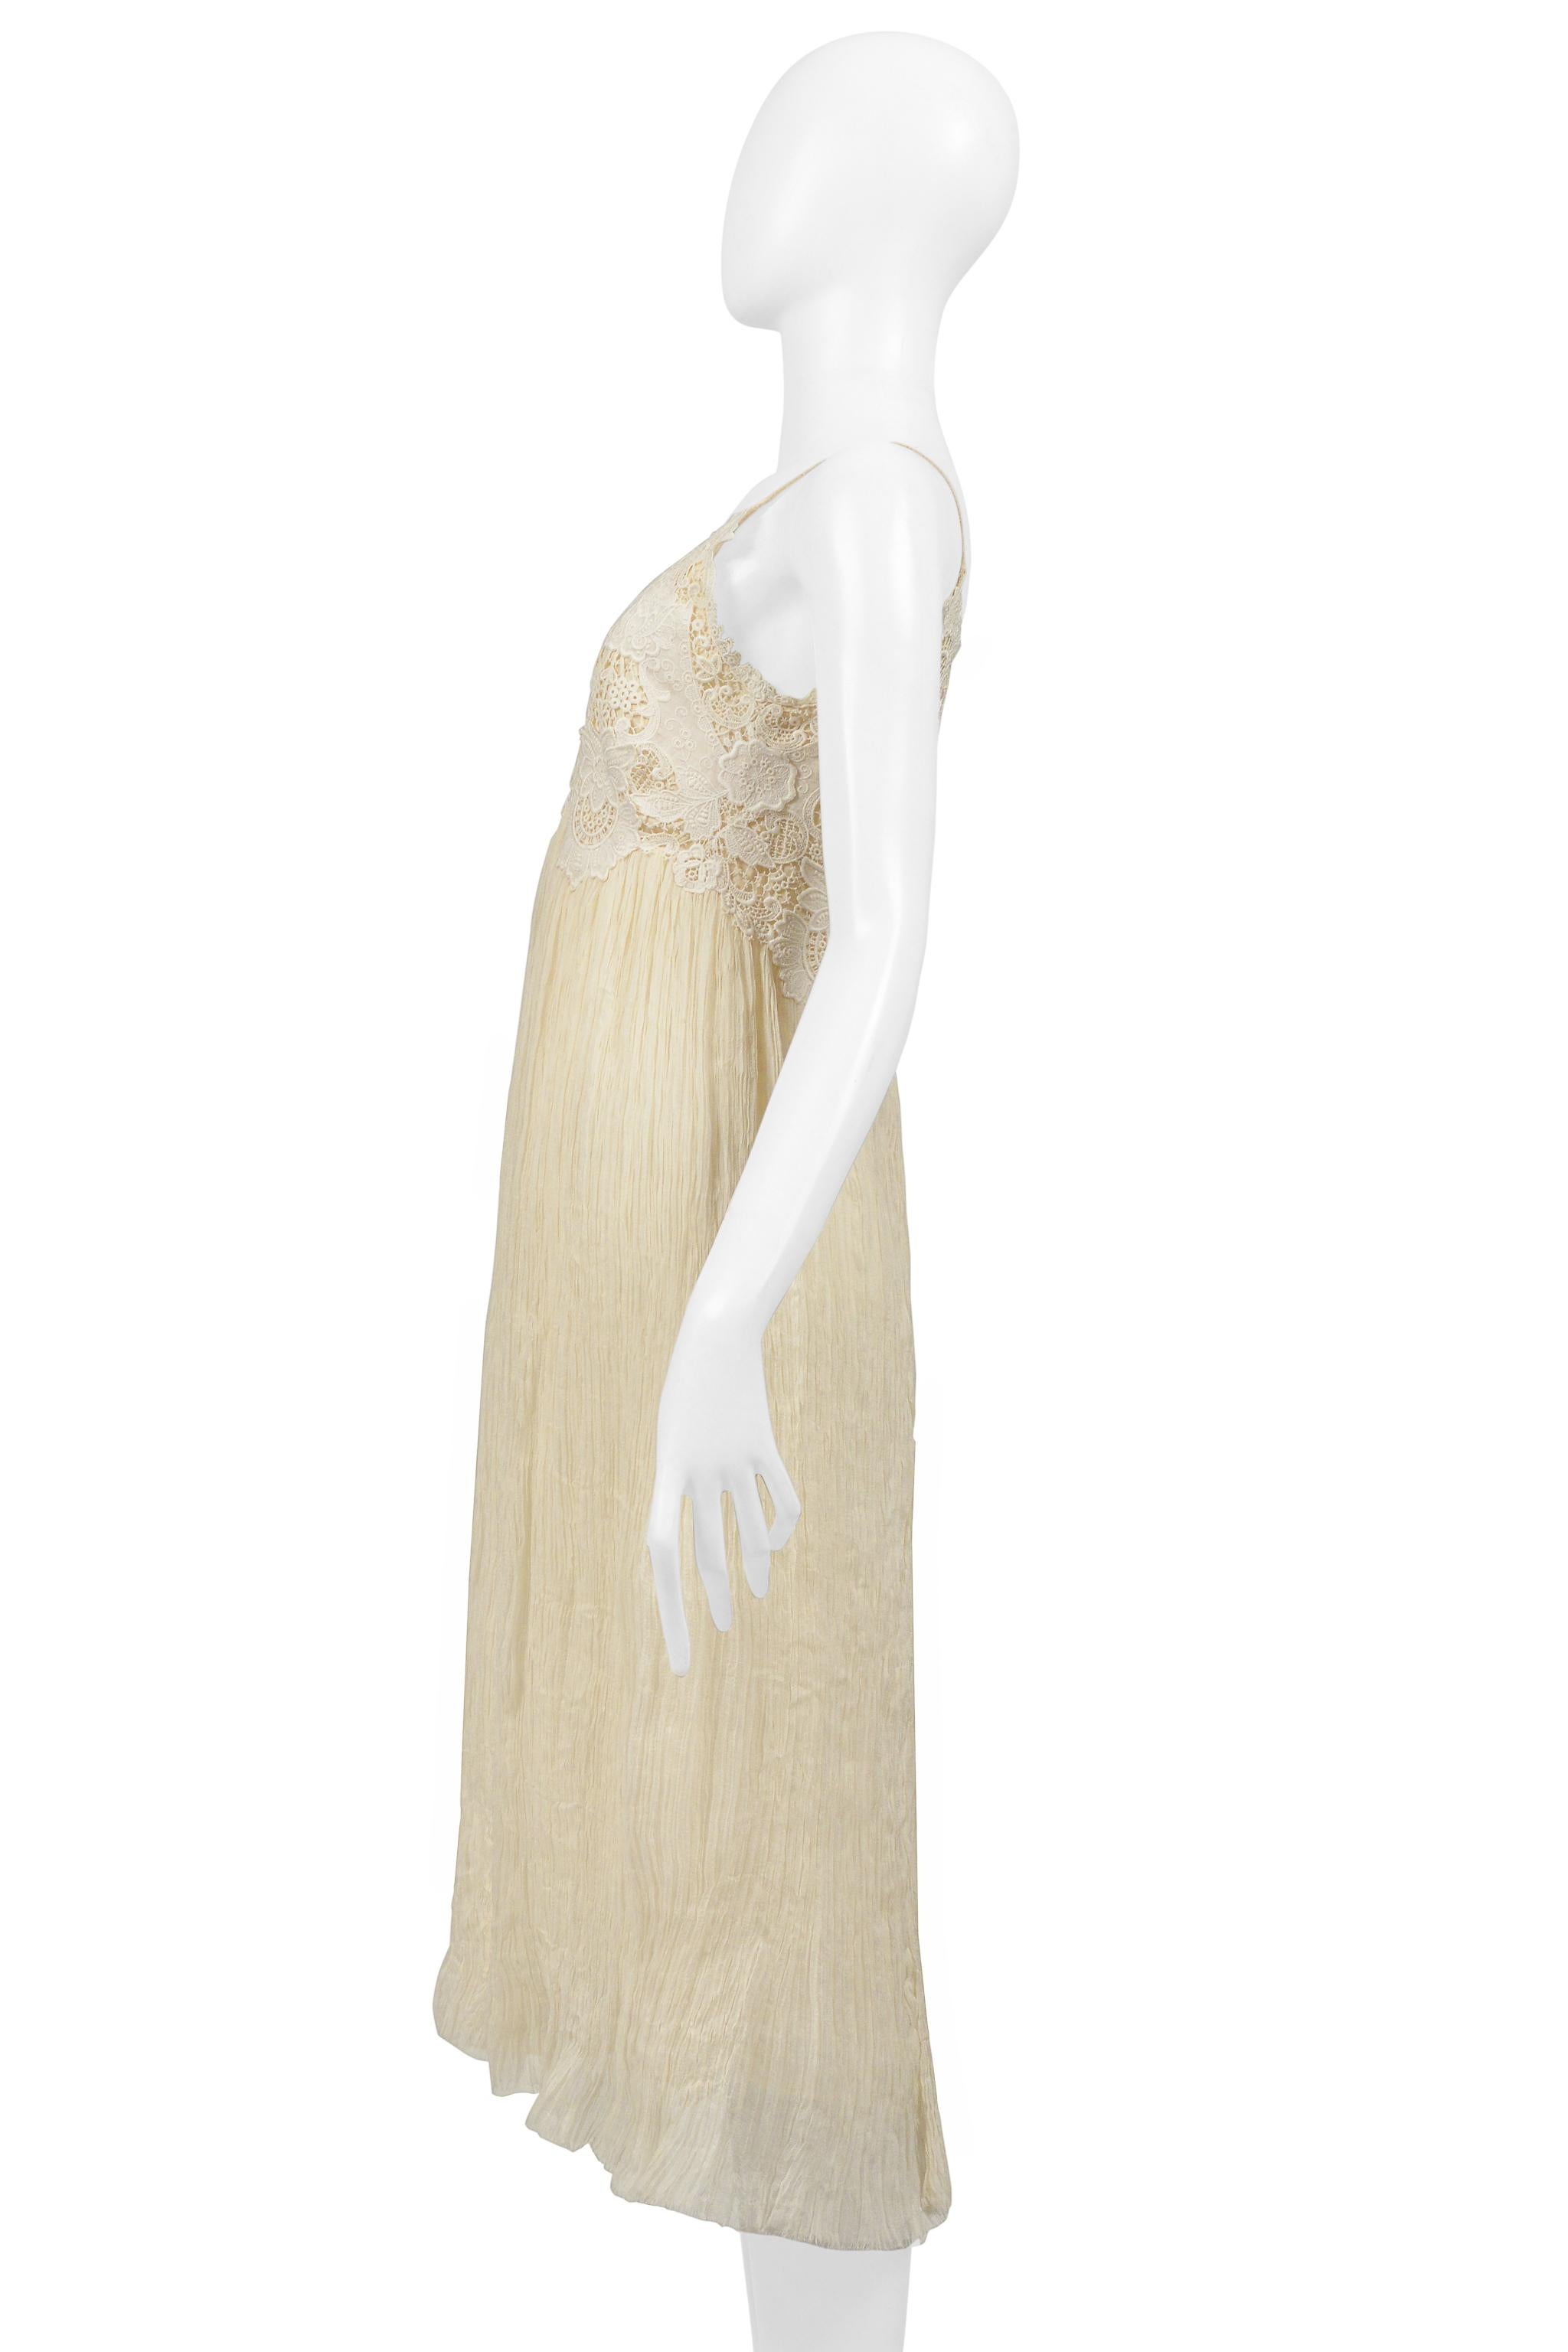 Alexander McQueen Off White Crinkle Dress W Lace Bodice 2005 For Sale 6